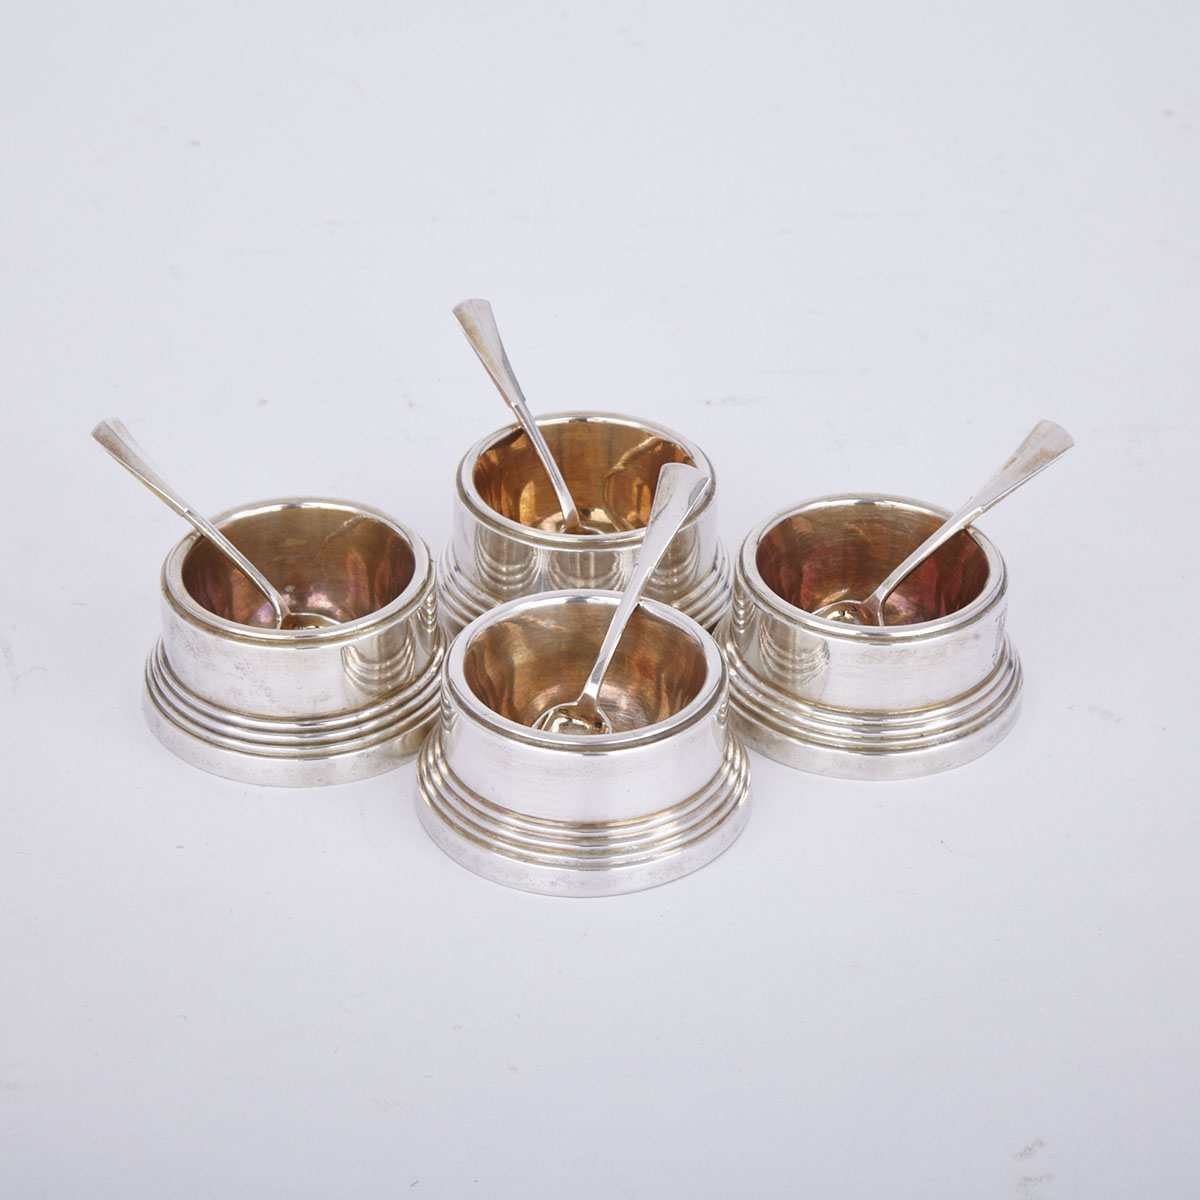 Set of Four Austro-Hungarian Silver Salt Cellars, Pest, early 20th century